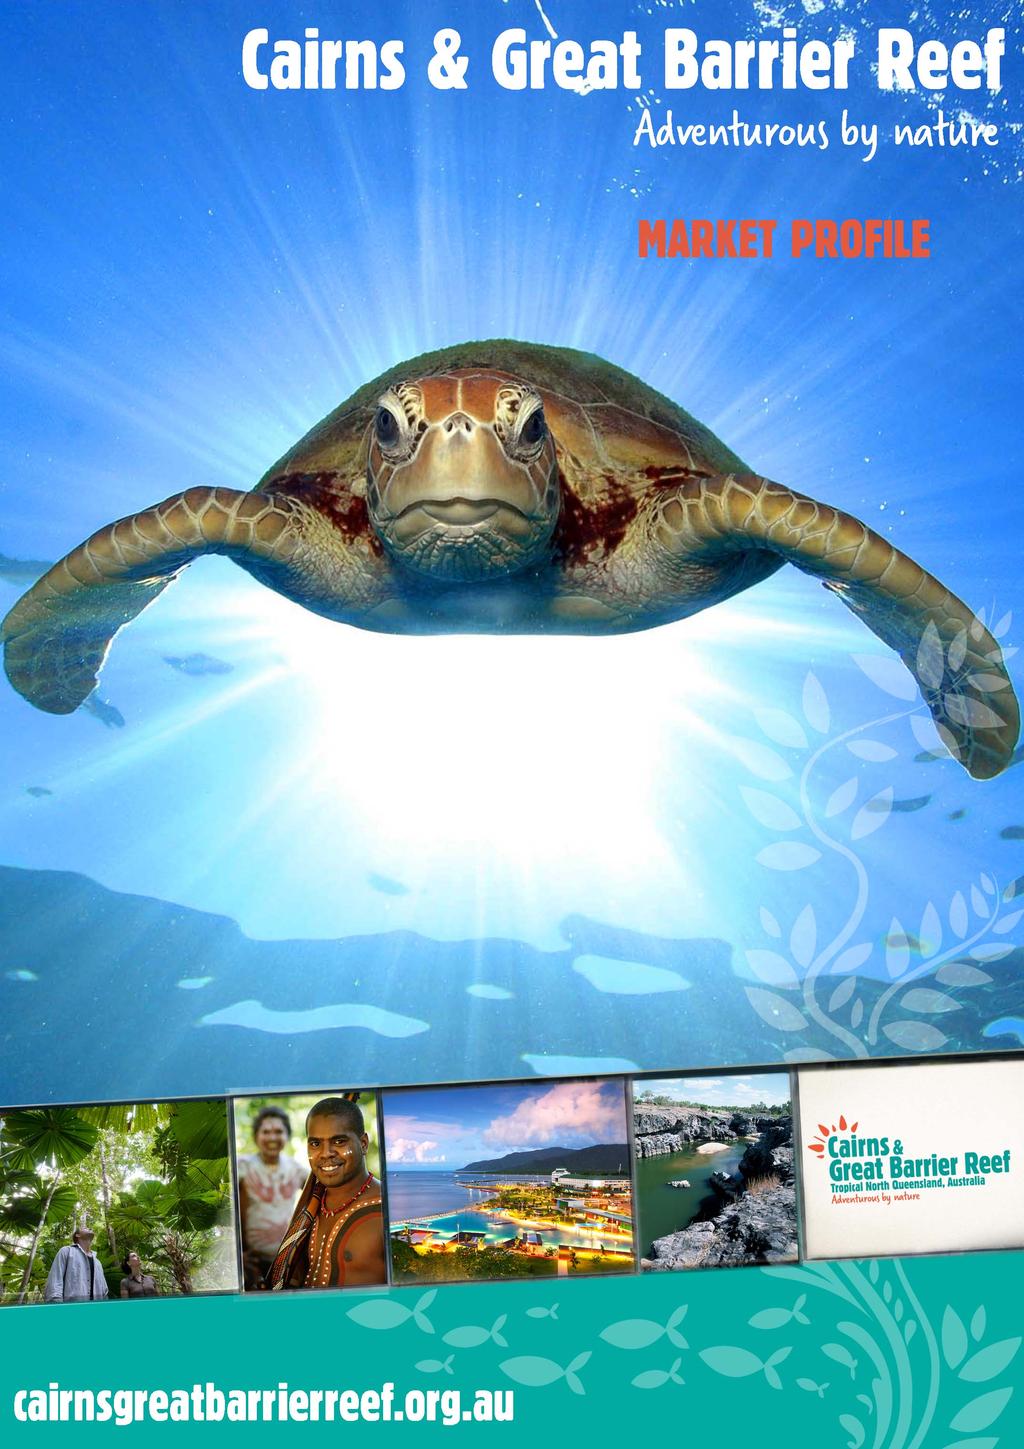 Cairns & Great Barrier Reef Adventurus by nature Updated n: Friday, 5 July 2013